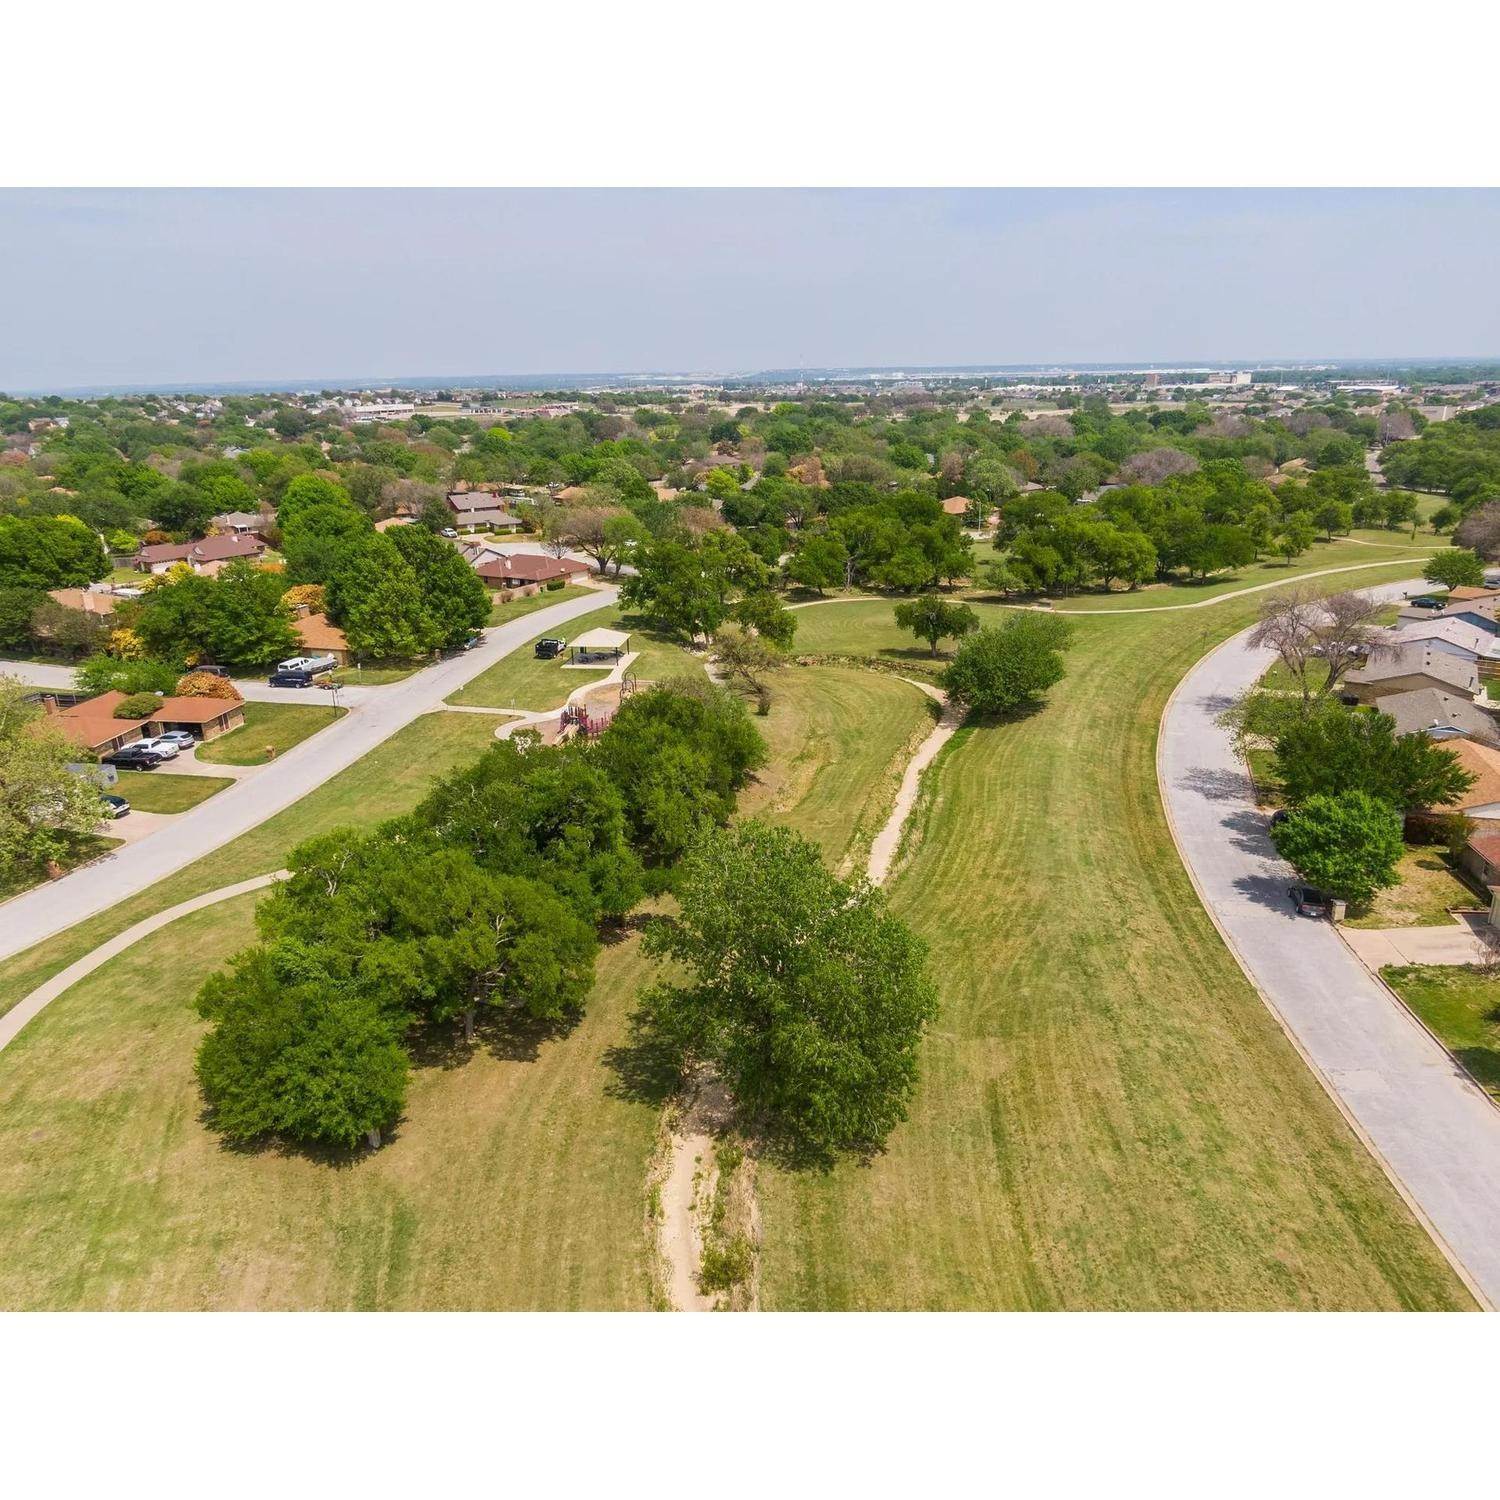 22. Chapel Creek Ranch building at 716 Long Iron Dr, Fort Worth, TX 76108